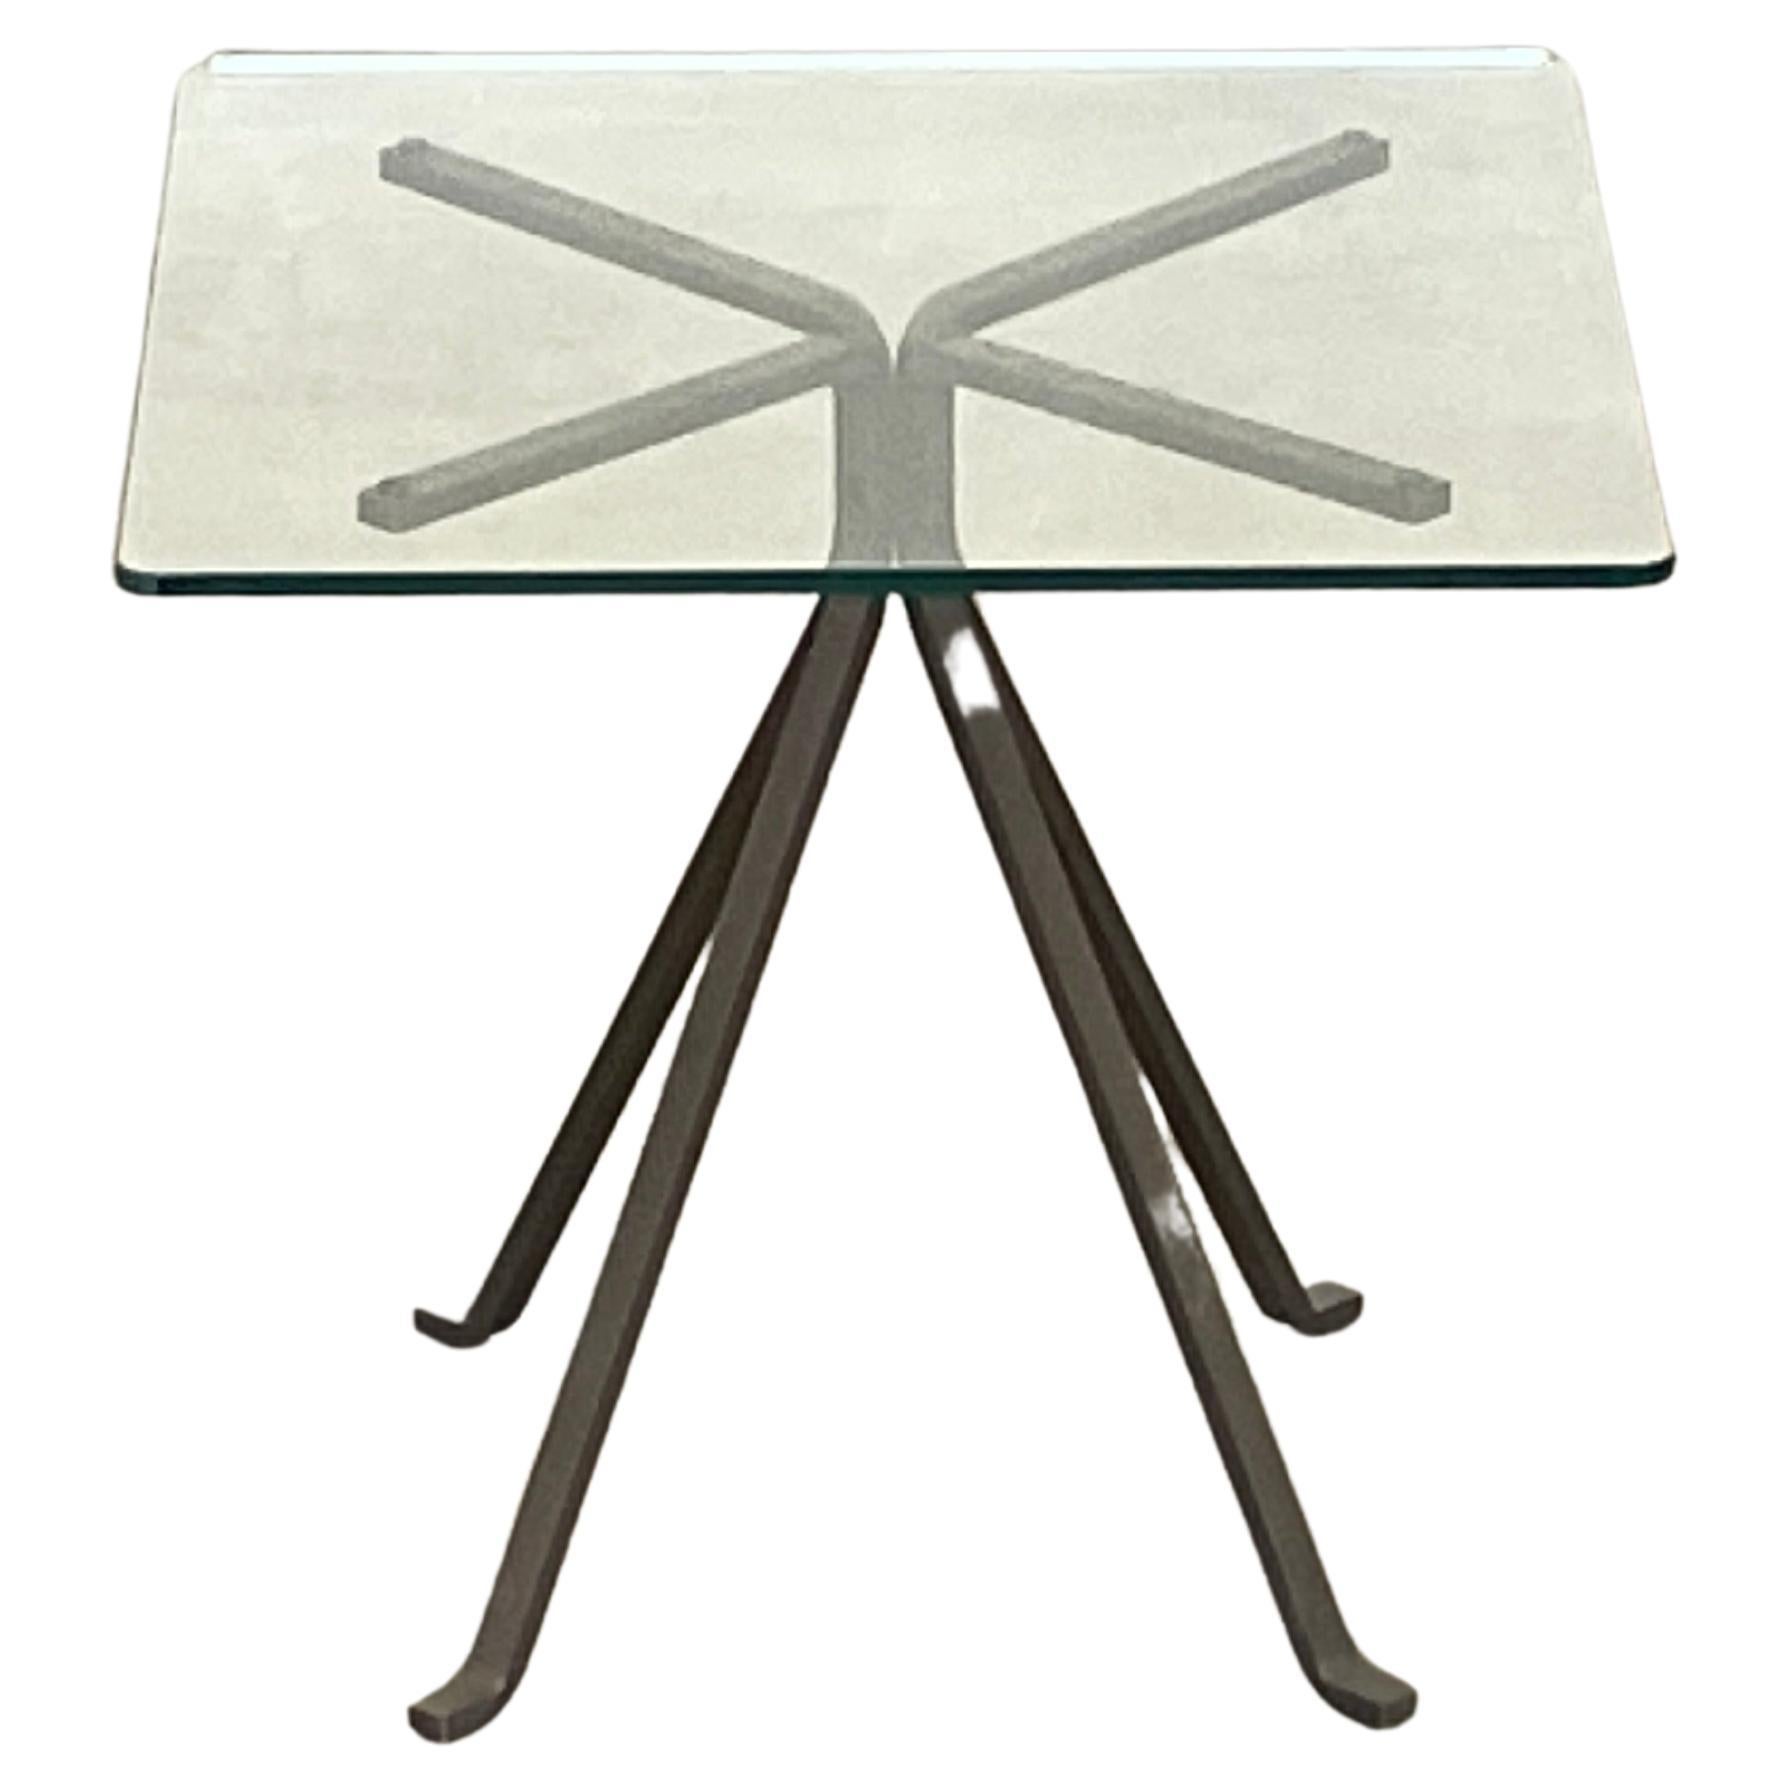 Table d'appoint Cuginetto d'Enzo Mari pour Driade, Italie, 1976